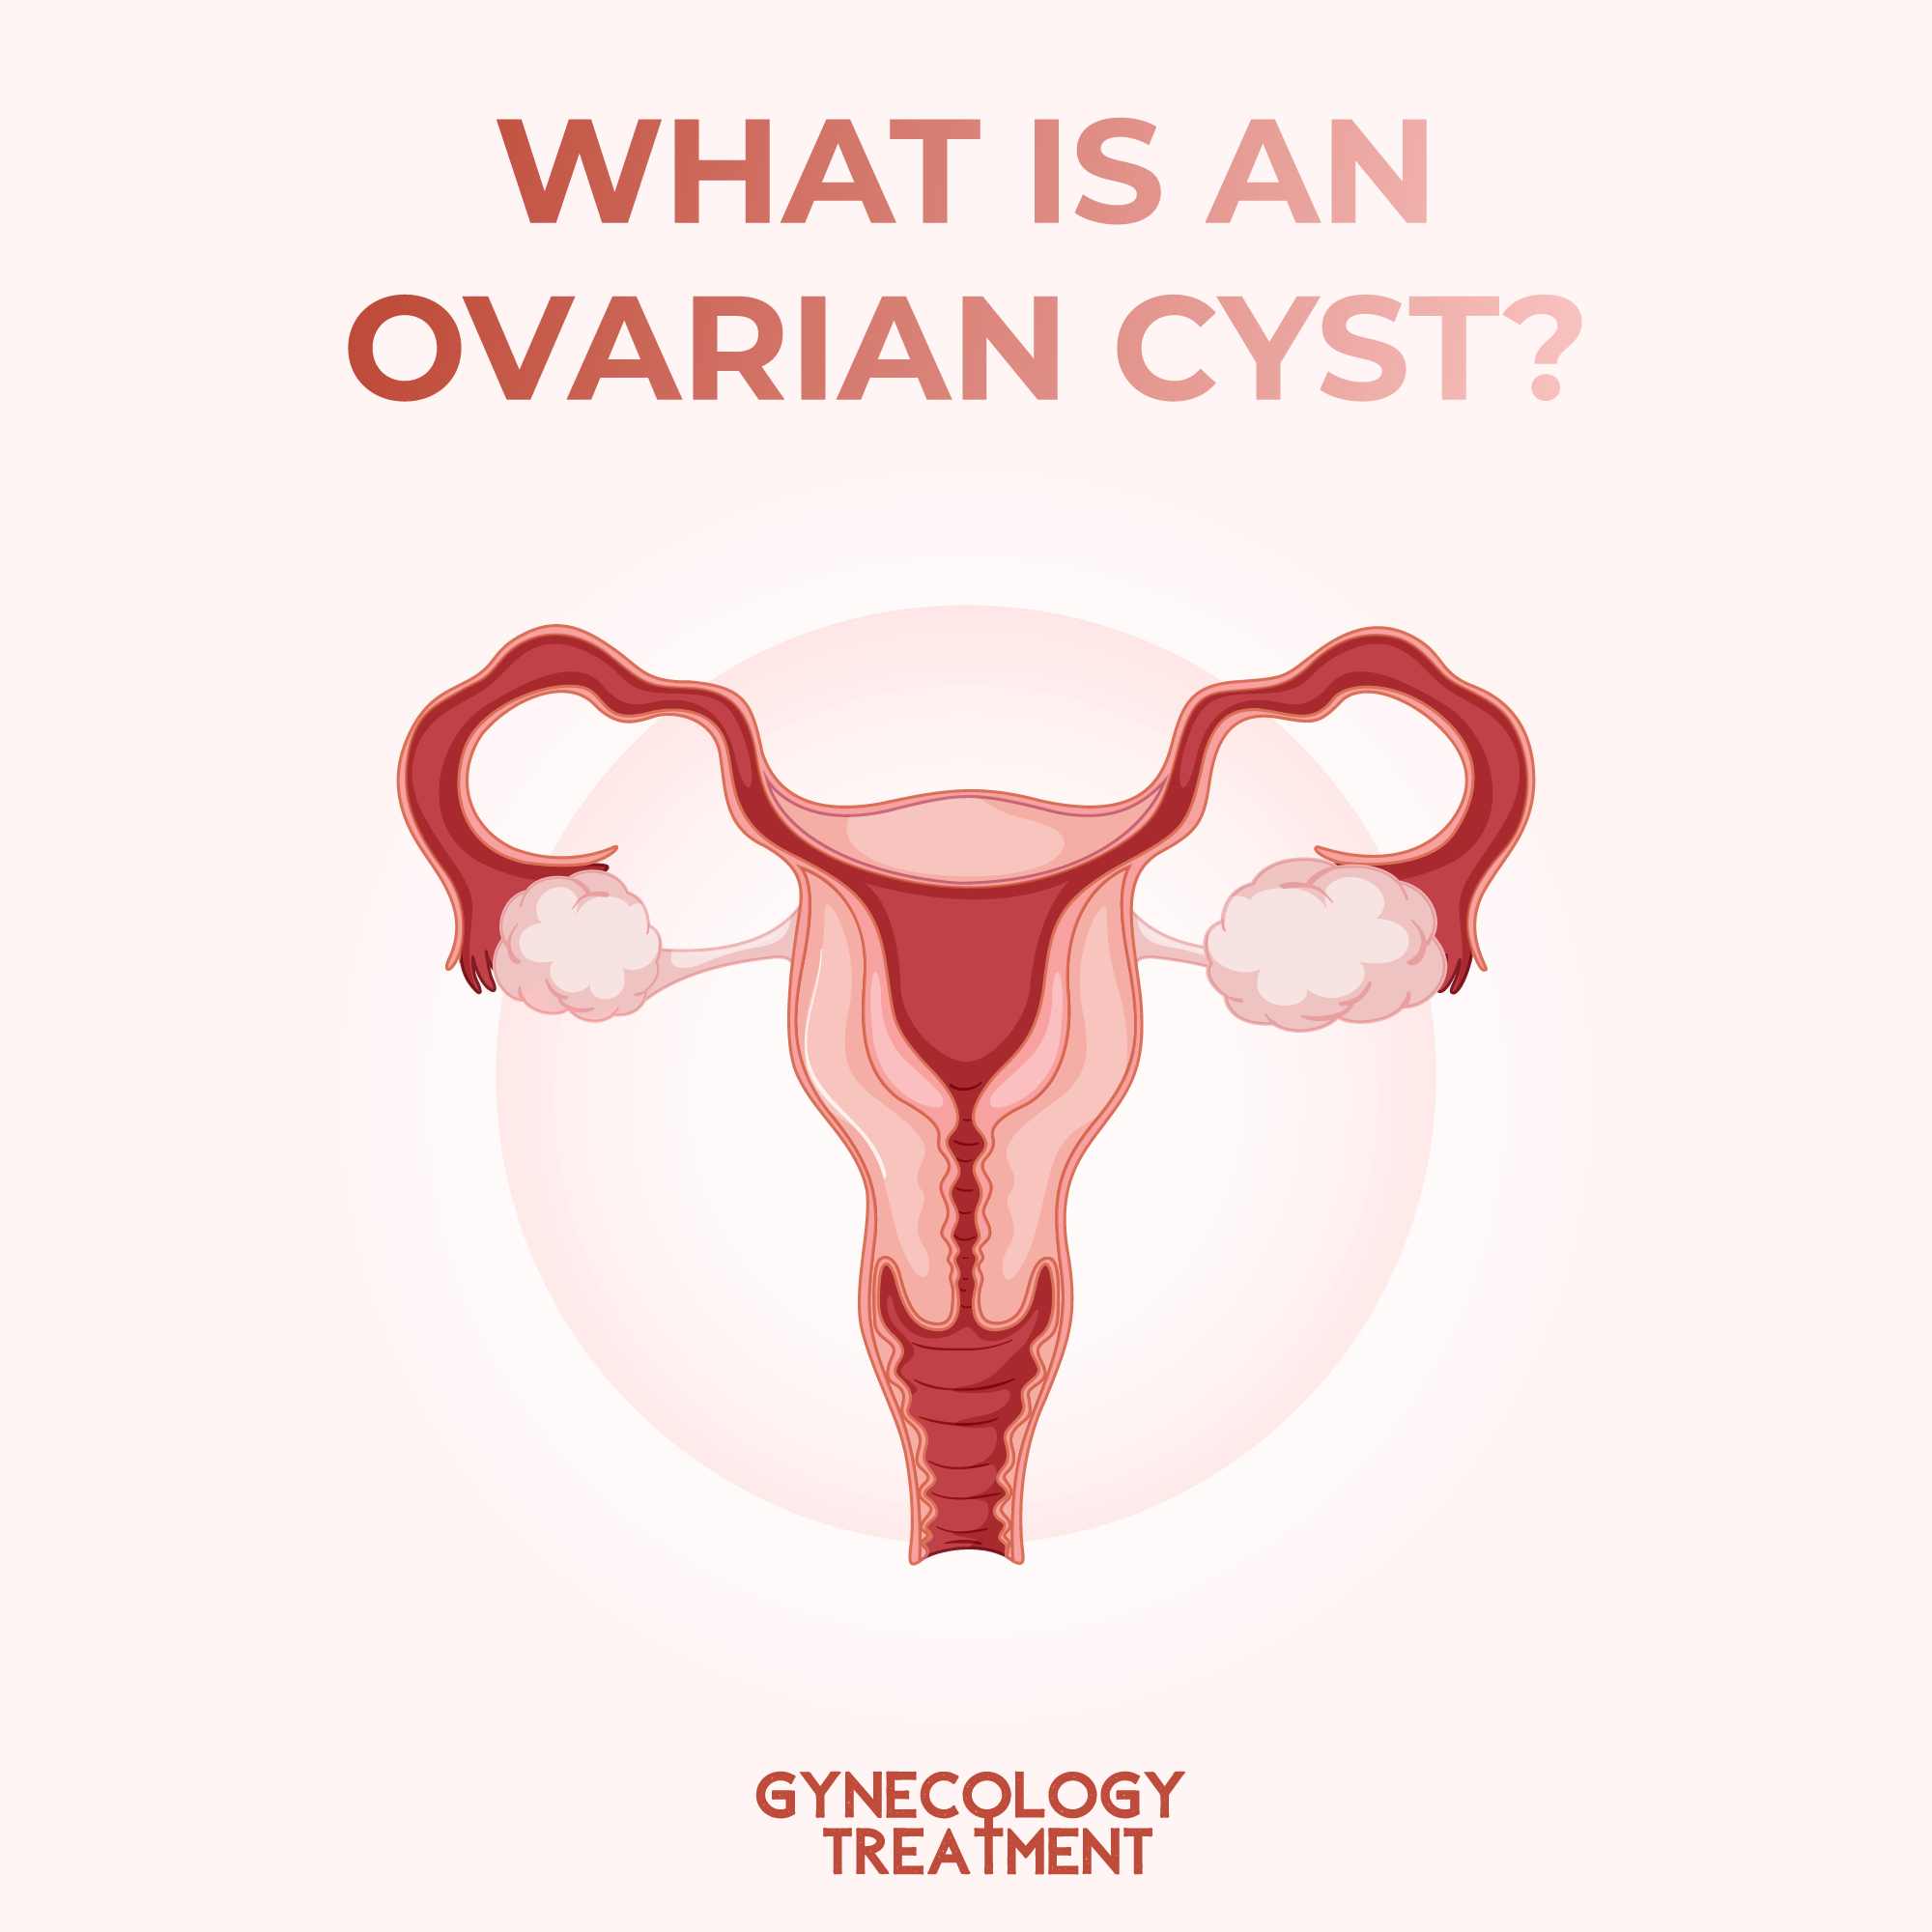 WHAT IS AN OVARIAN CYST?